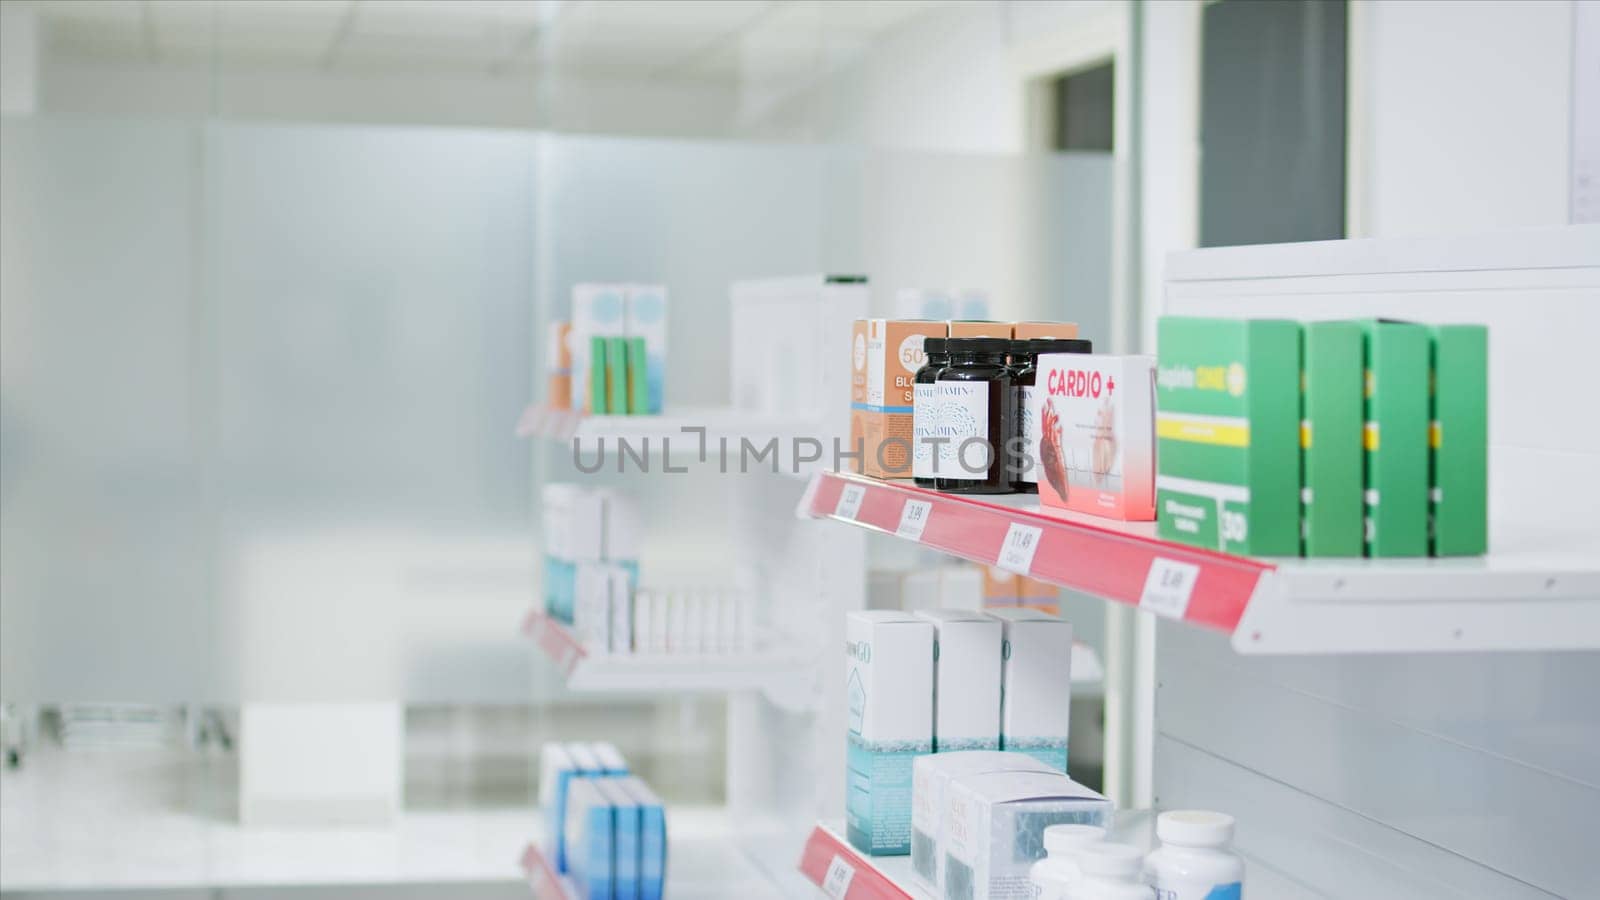 Selective focus of medicaments and supplements on shelves, empty pharmacy stacked with prescription medicine and medical supplies. Drugstore having antibiotics and pharmaceutics for sale.